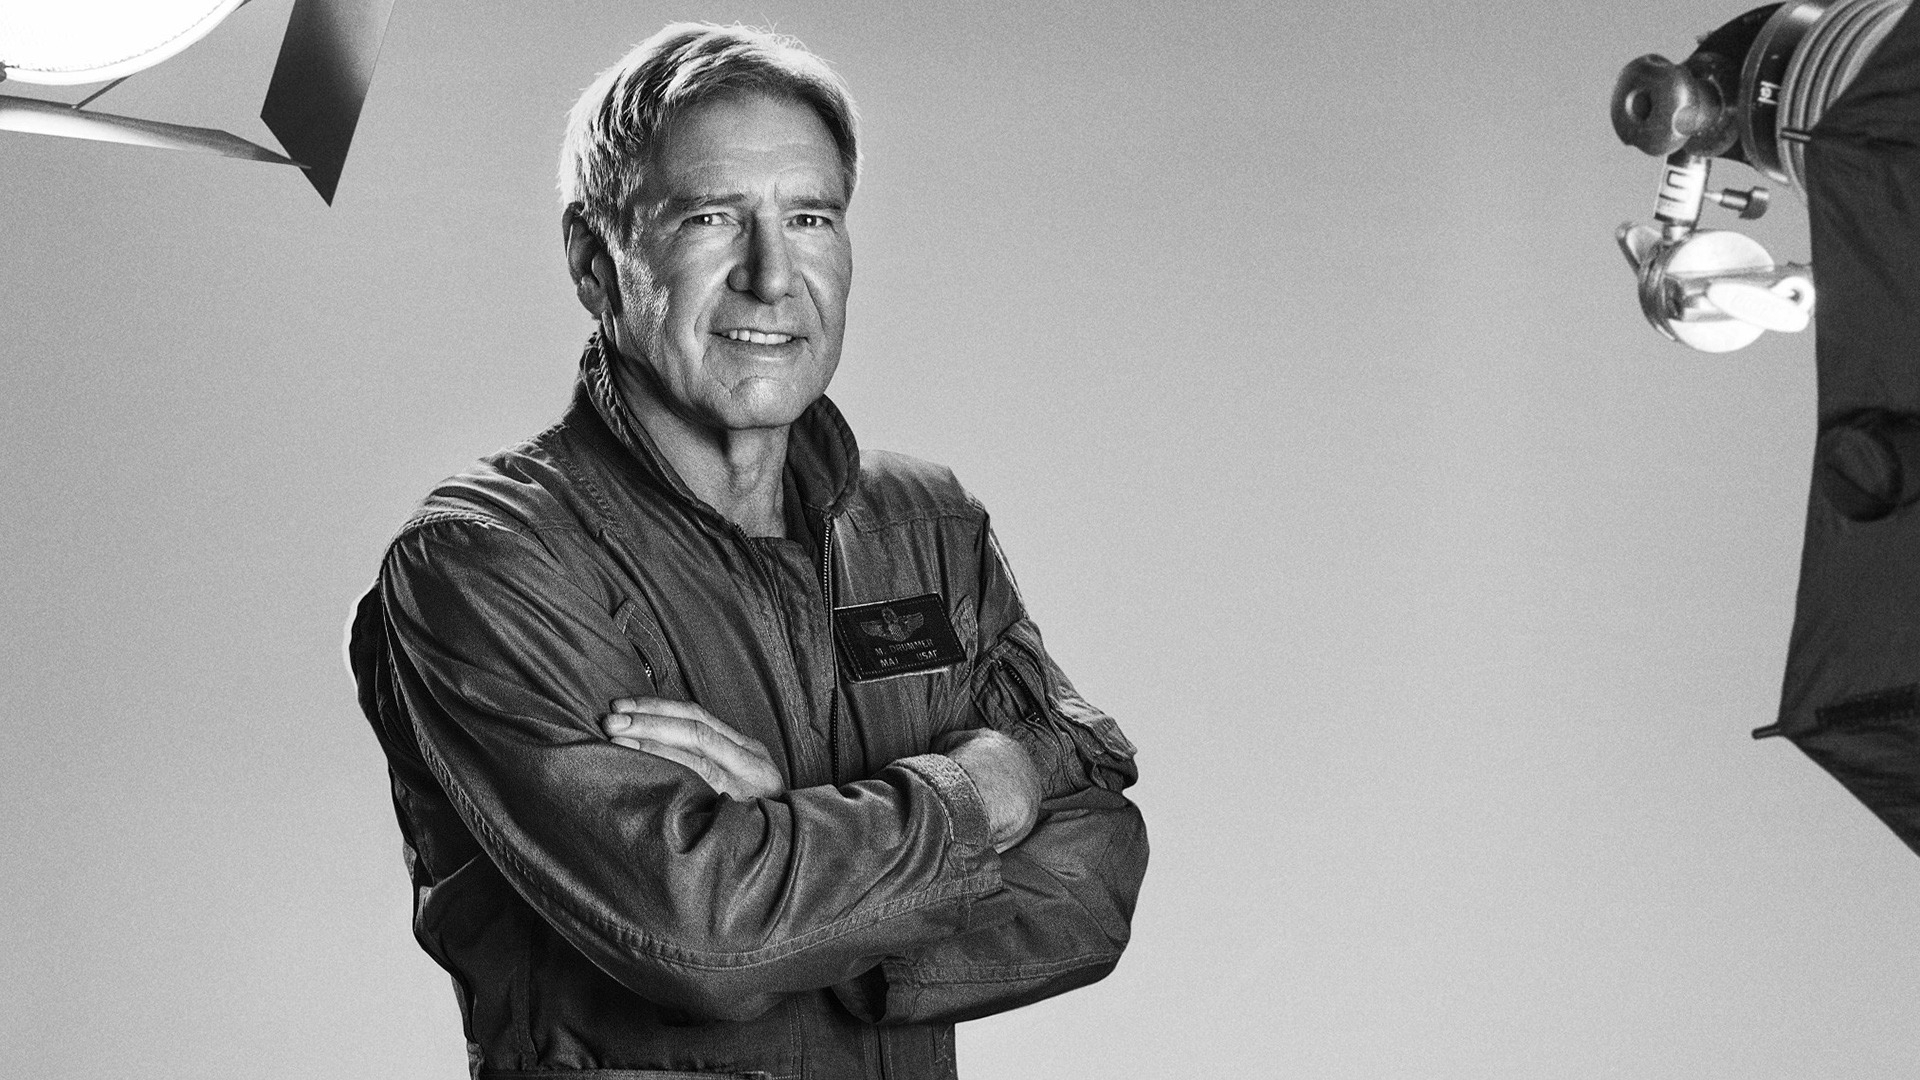 Harrison Ford The Expendables 3 for 1920 x 1080 HDTV 1080p resolution